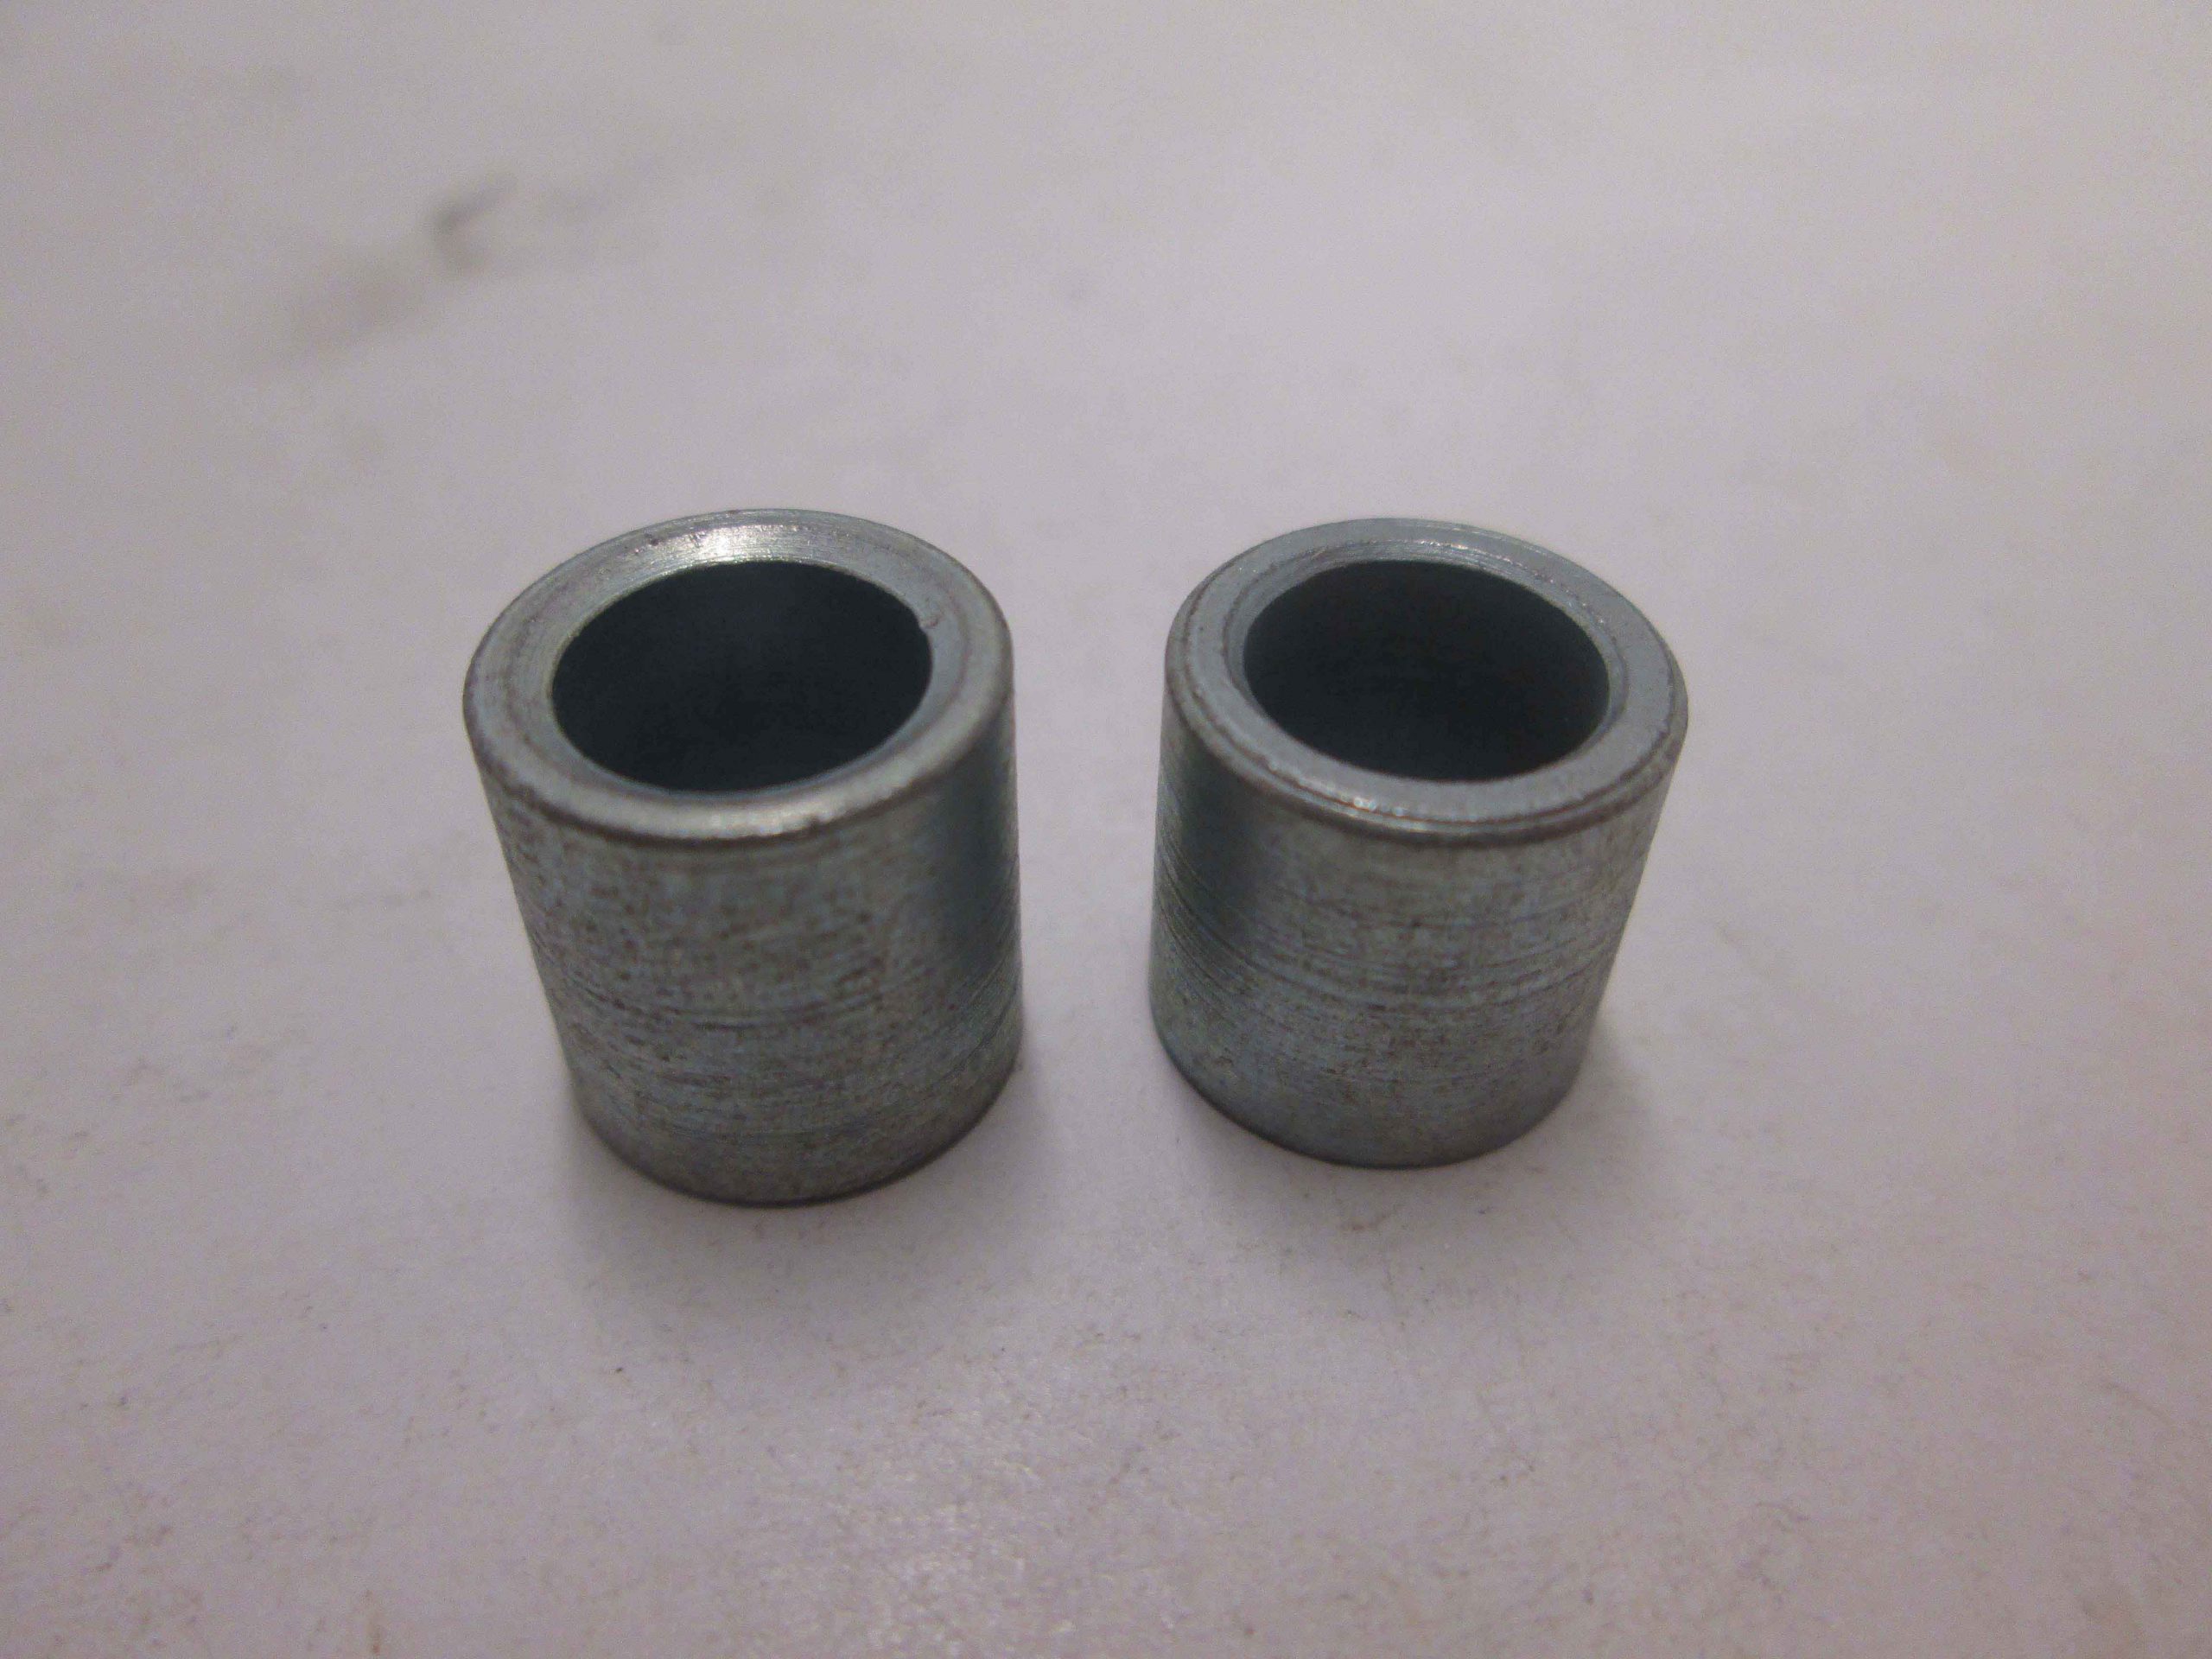 SPACER - 5/16 X 1/2 PK OF 2